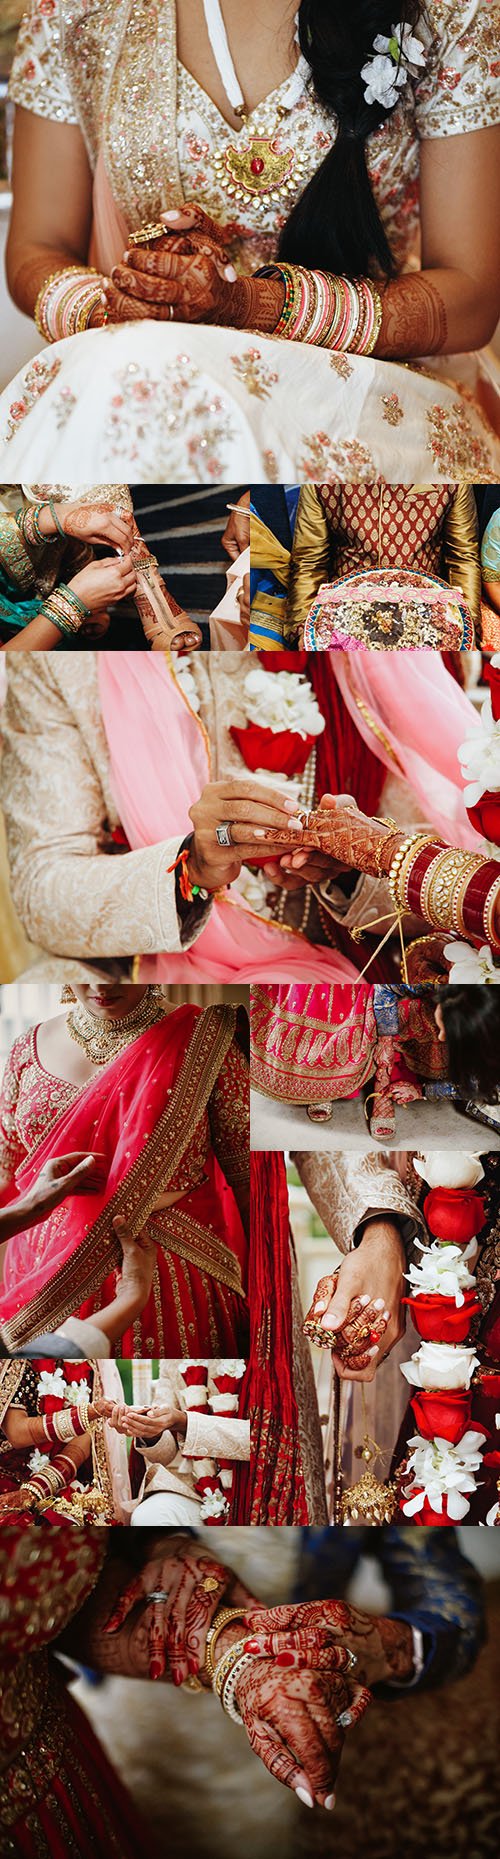 India wedding tradition ceremony and clothing items